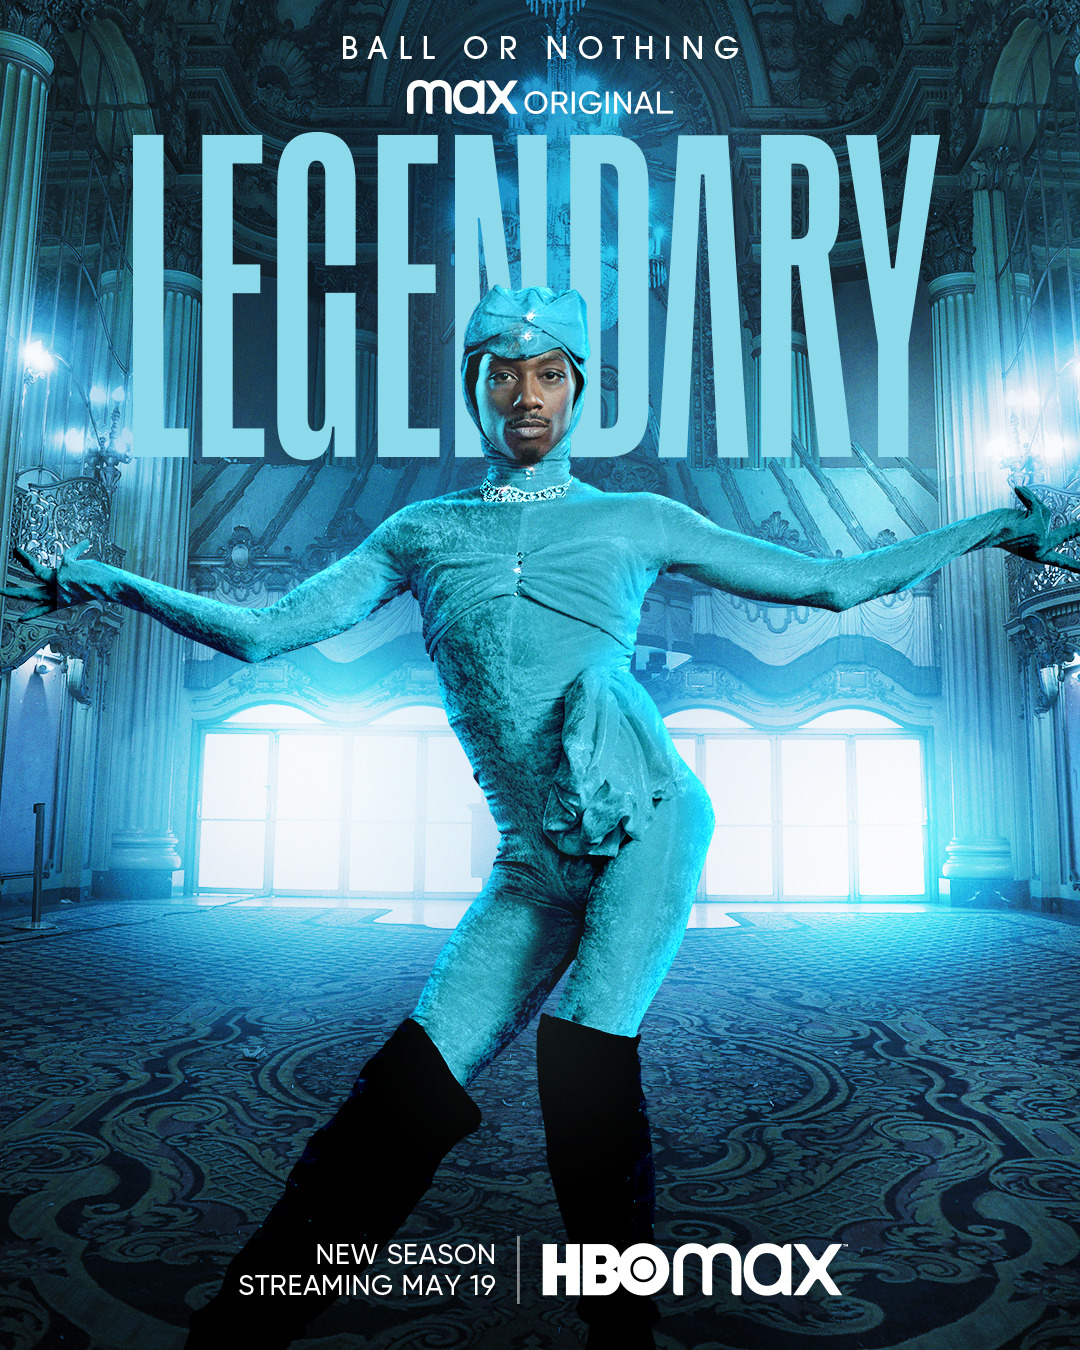 Extra Large TV Poster Image for Legendary (#153 of 173)